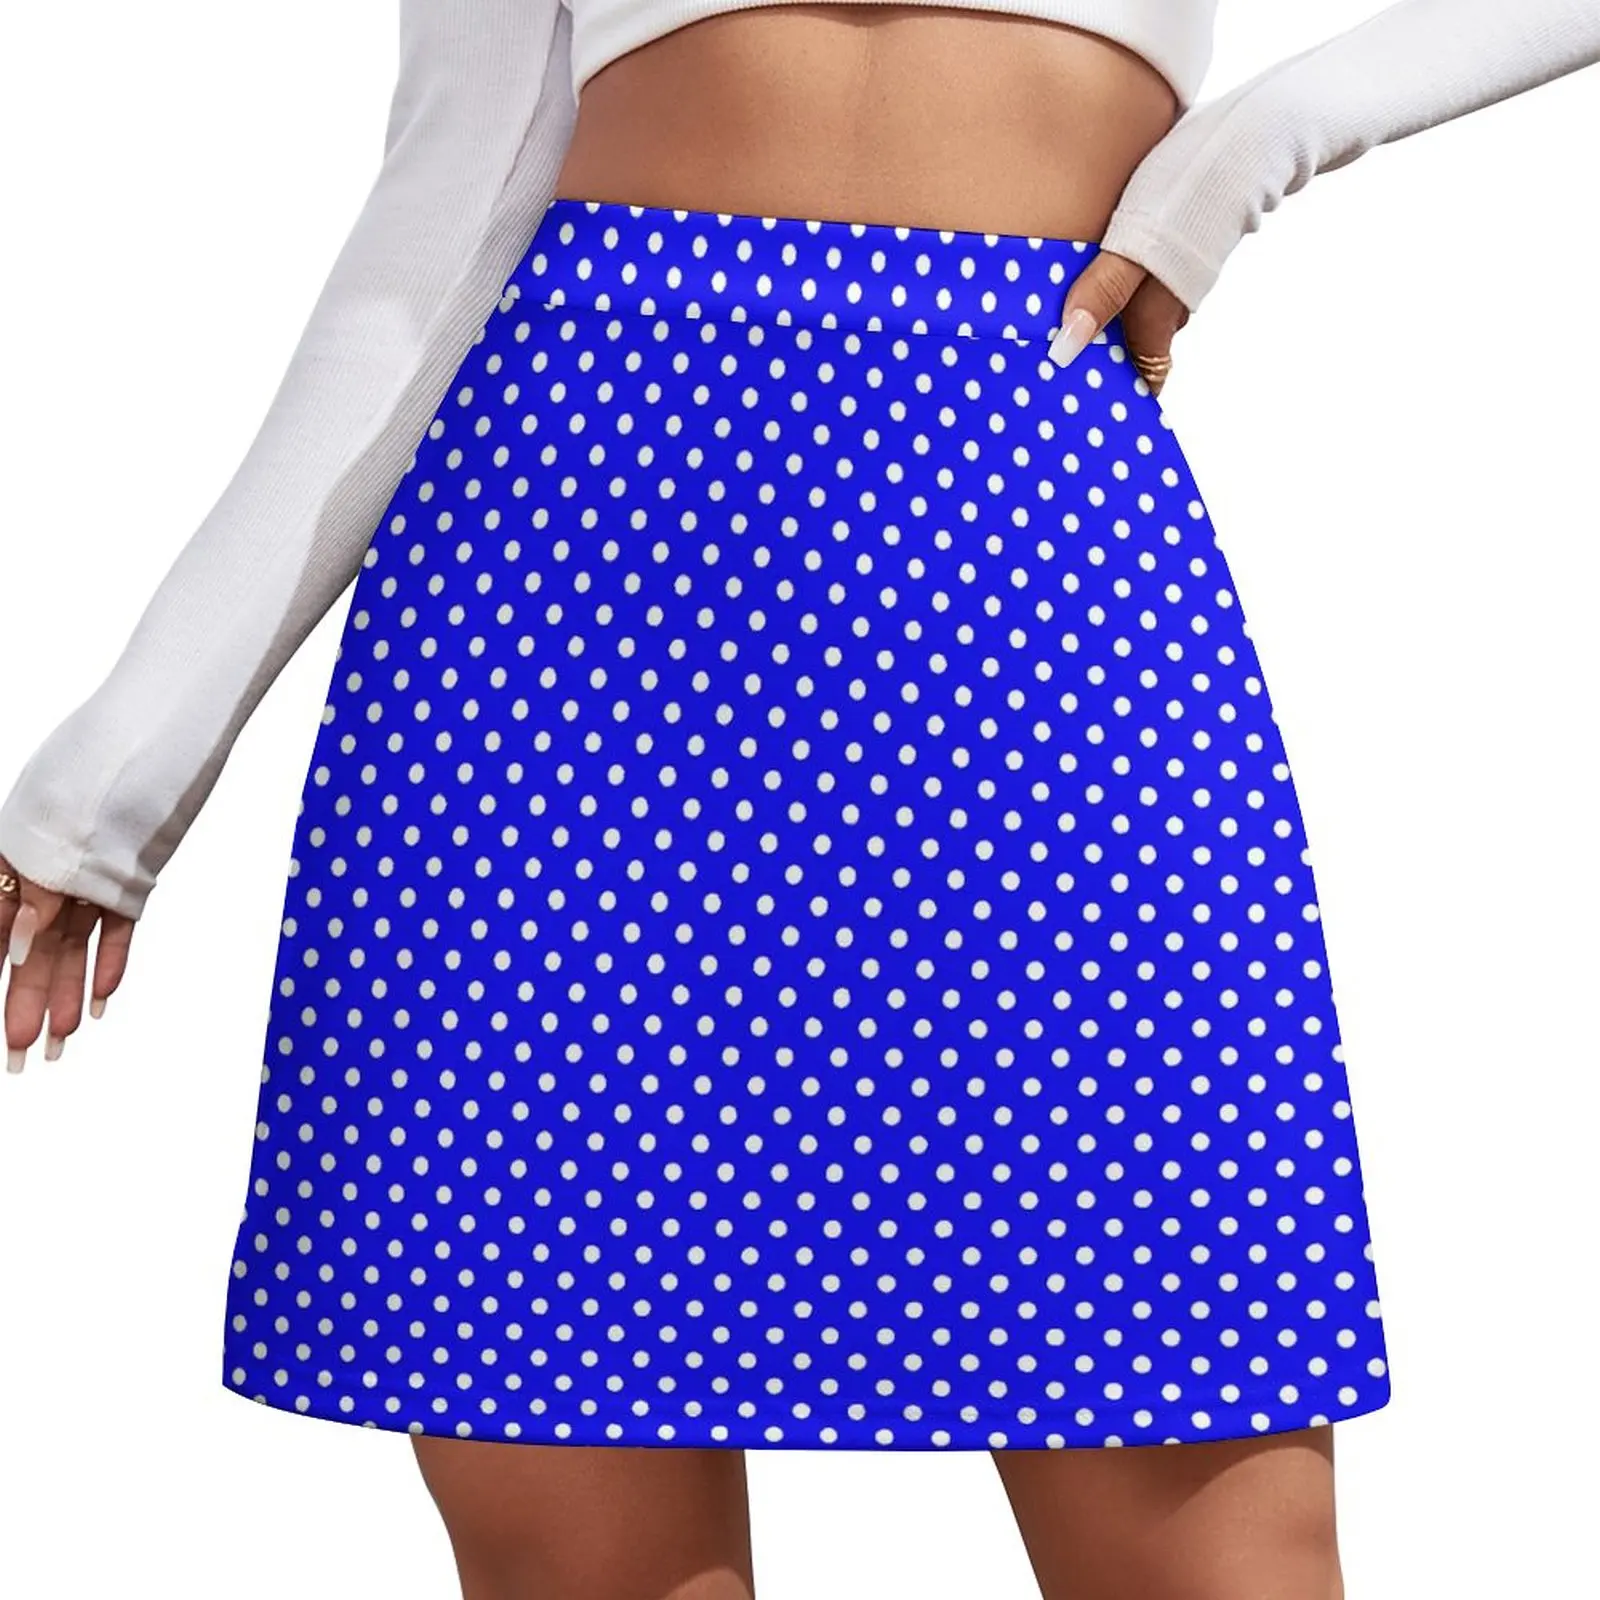 

Classic Polka Dots Skirt Summer Blue and White Harajuku Casual A-line Skirts Vintage Mini Skirt Ladies Printed Oversized Bottoms